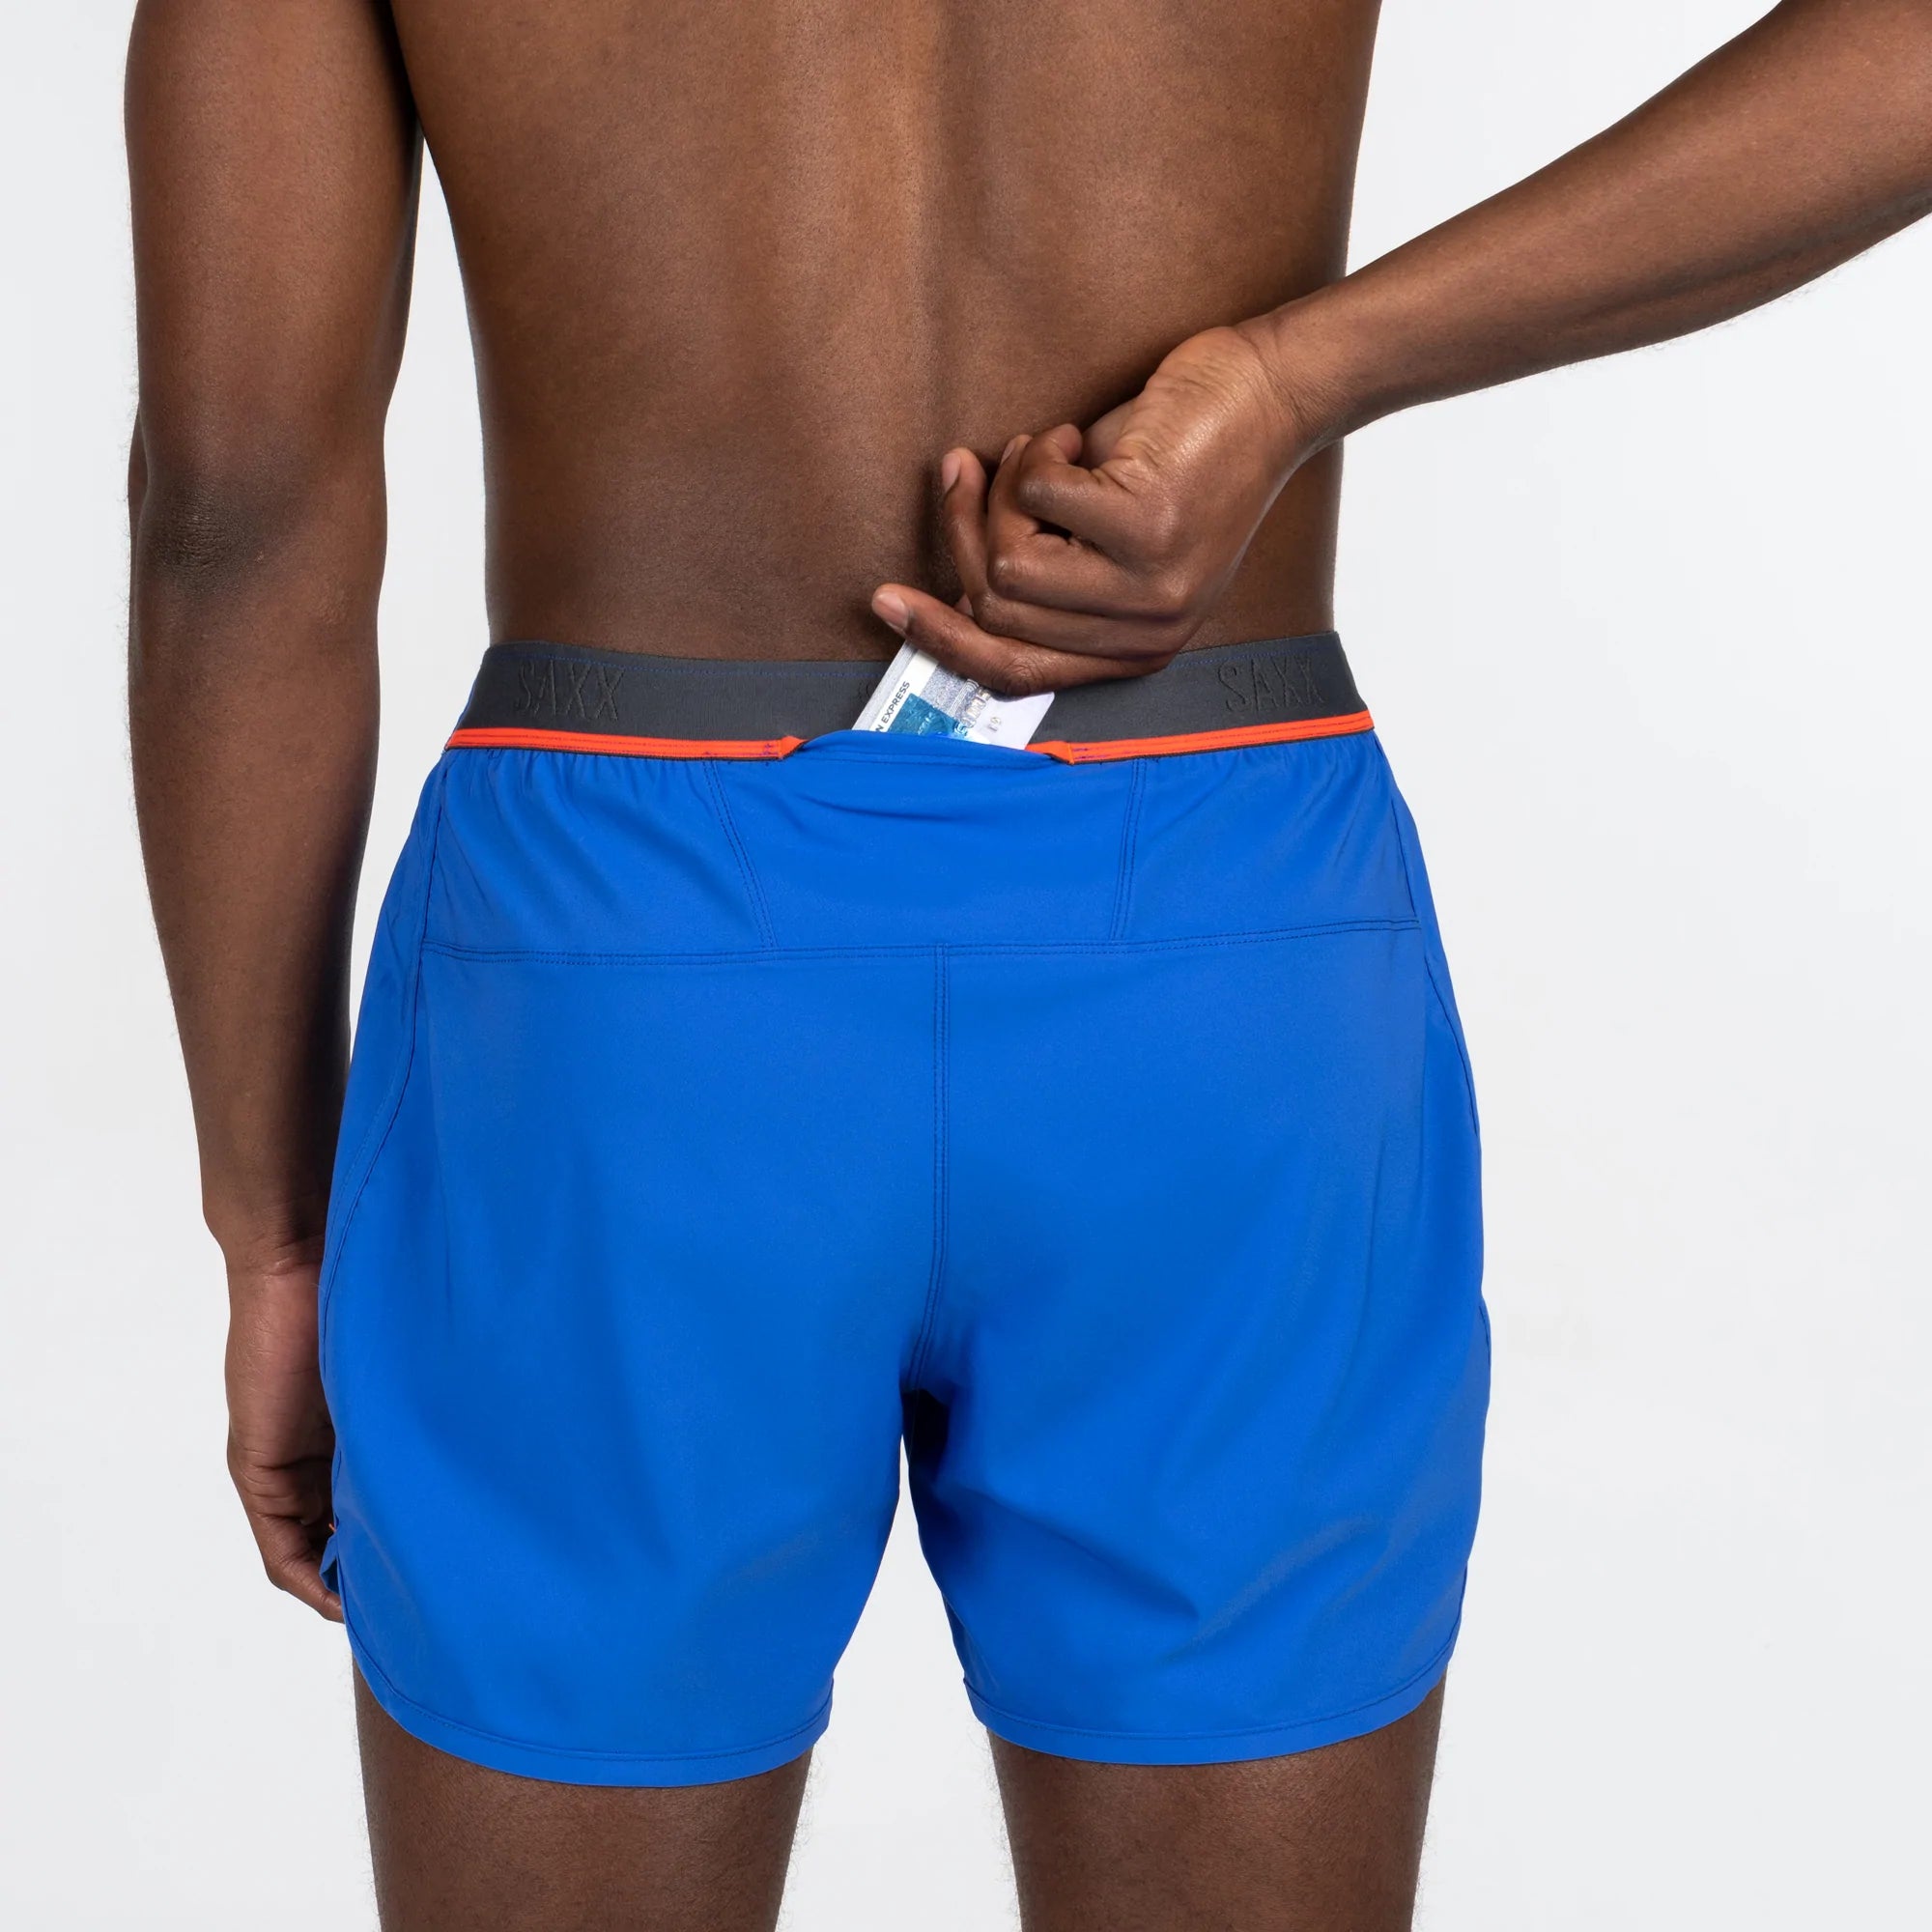 Hightail 2N1 Short in Sport Blue with hidden stash pocket in back of waistband